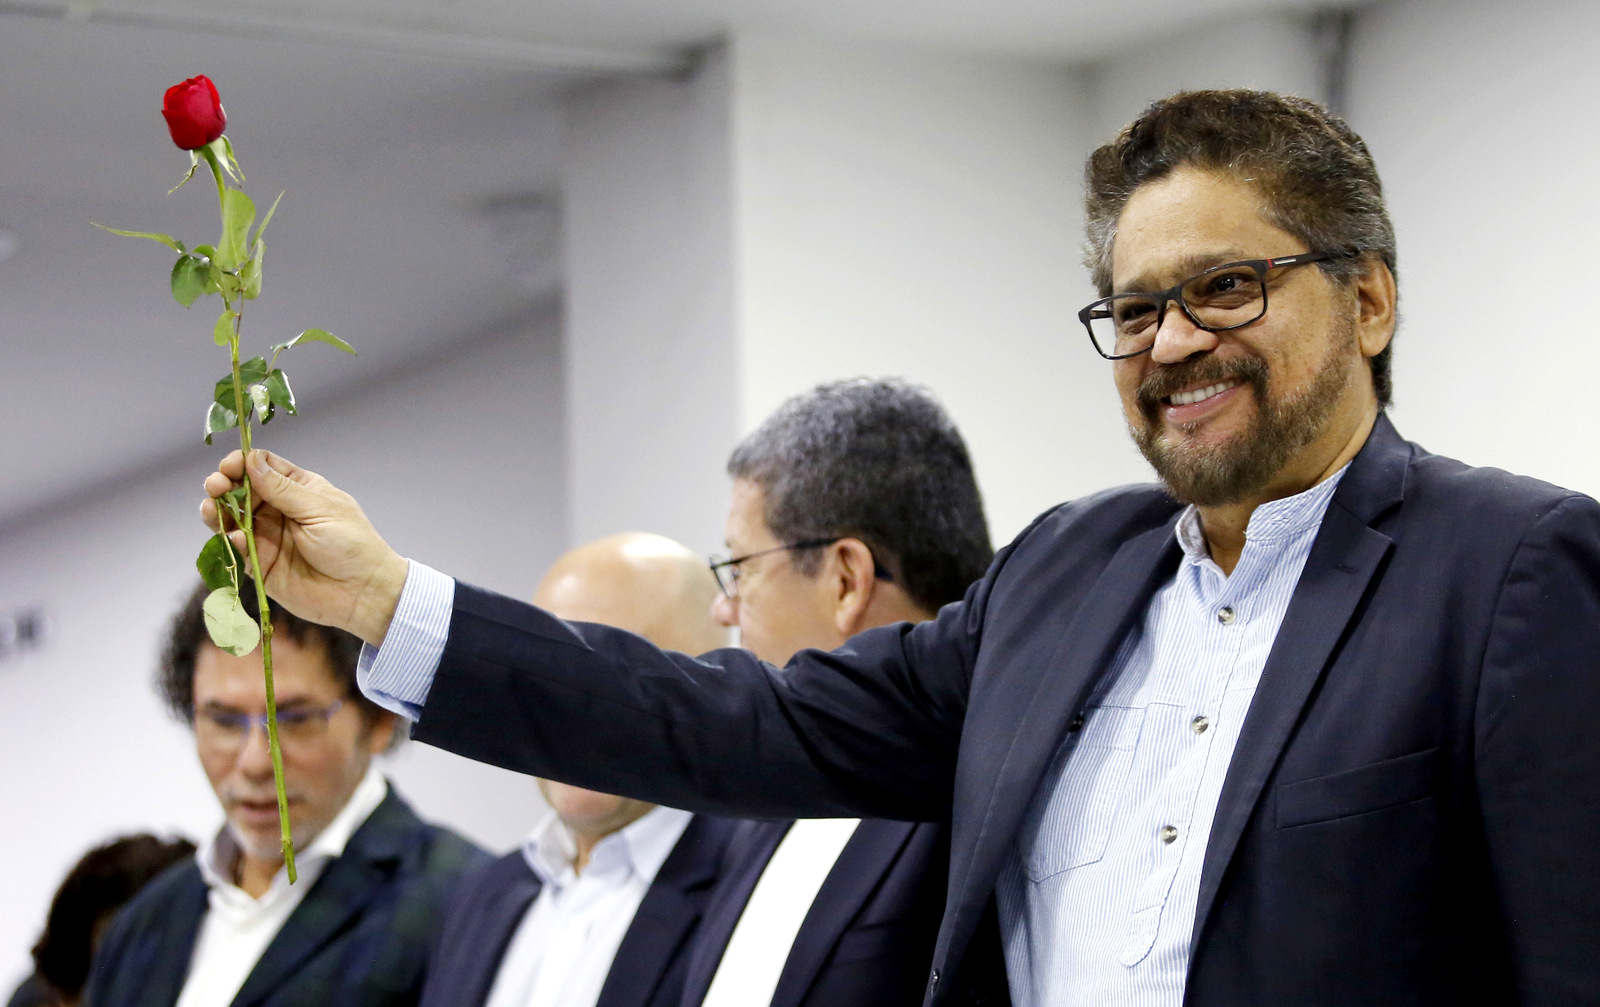 Ivan Marquez holds a red rose, the symbol of the new political party Alternative Communal Revolutionary Forces, during a press conference in Bogota, Colombia, Sept. 1, 2017. (AP/Fernando Vergara)